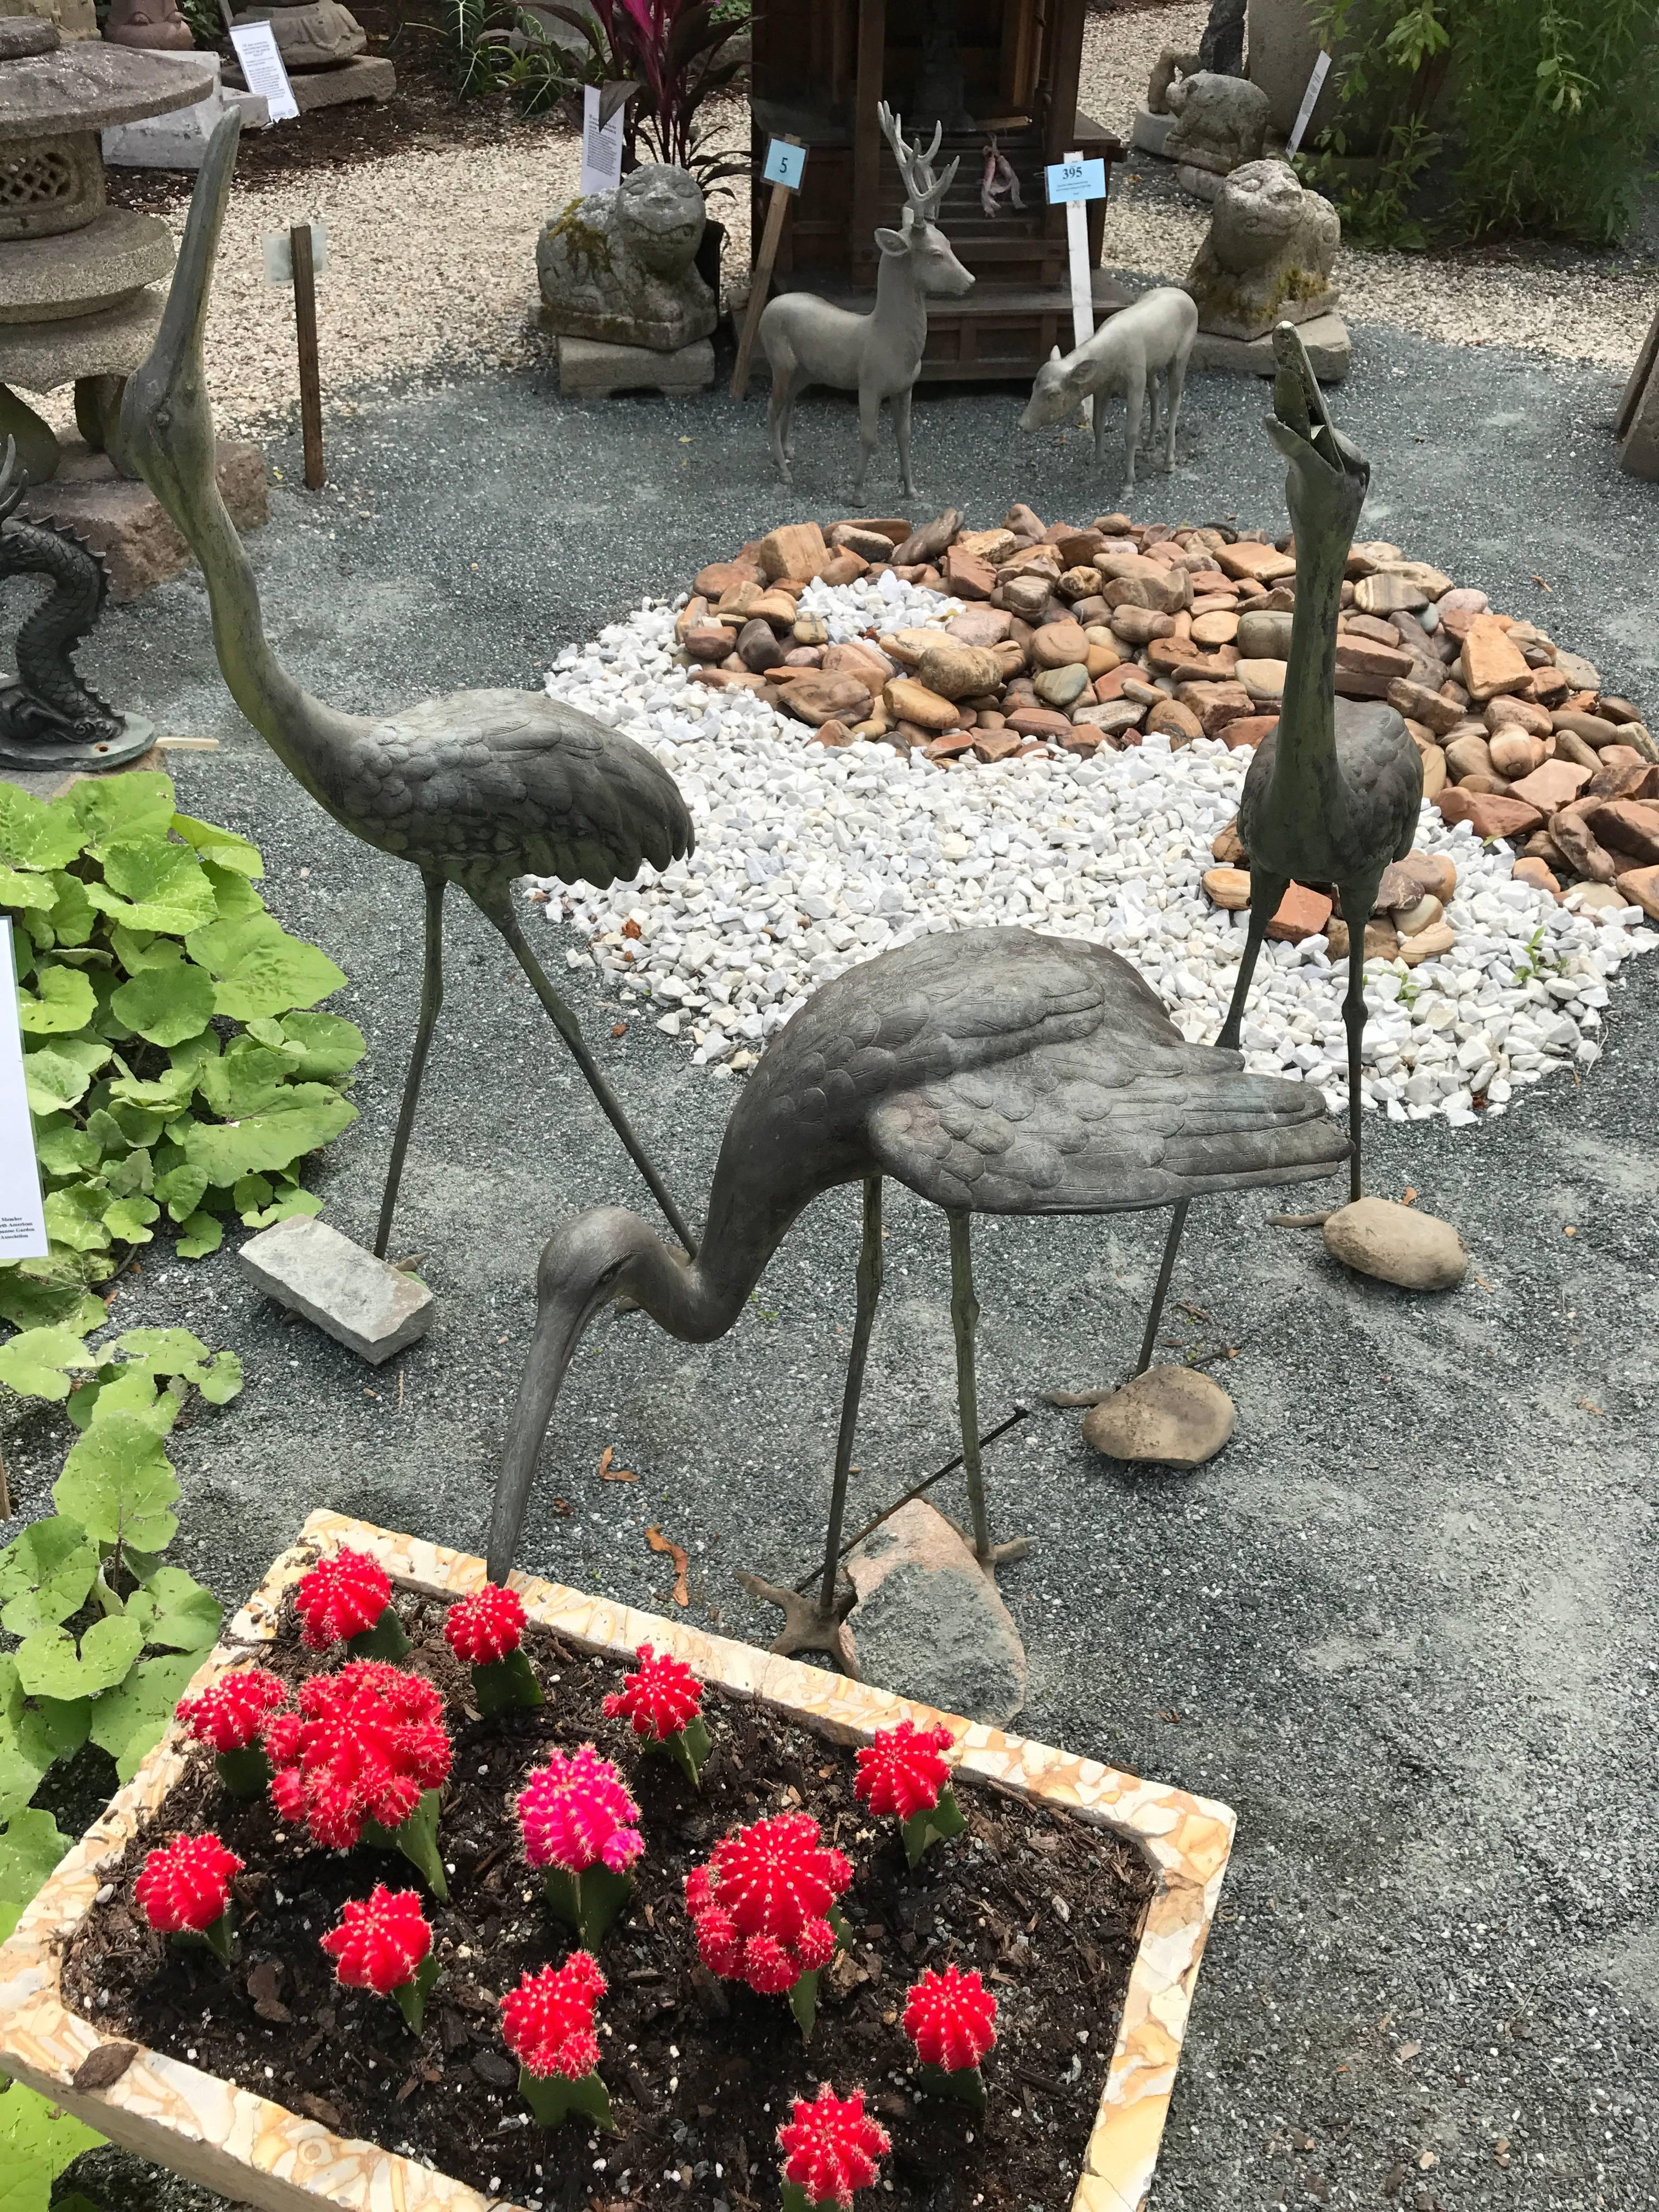 Japan, a fine set of three tall and largest scale hand caste bronze finely detailed cranes. Fine old variegated green patina surfaces. 

Dimensions:
Tallest crane 42 inches tall and 15 inches wide
Medium crane 40 inches tall and 15 inches wide
Small